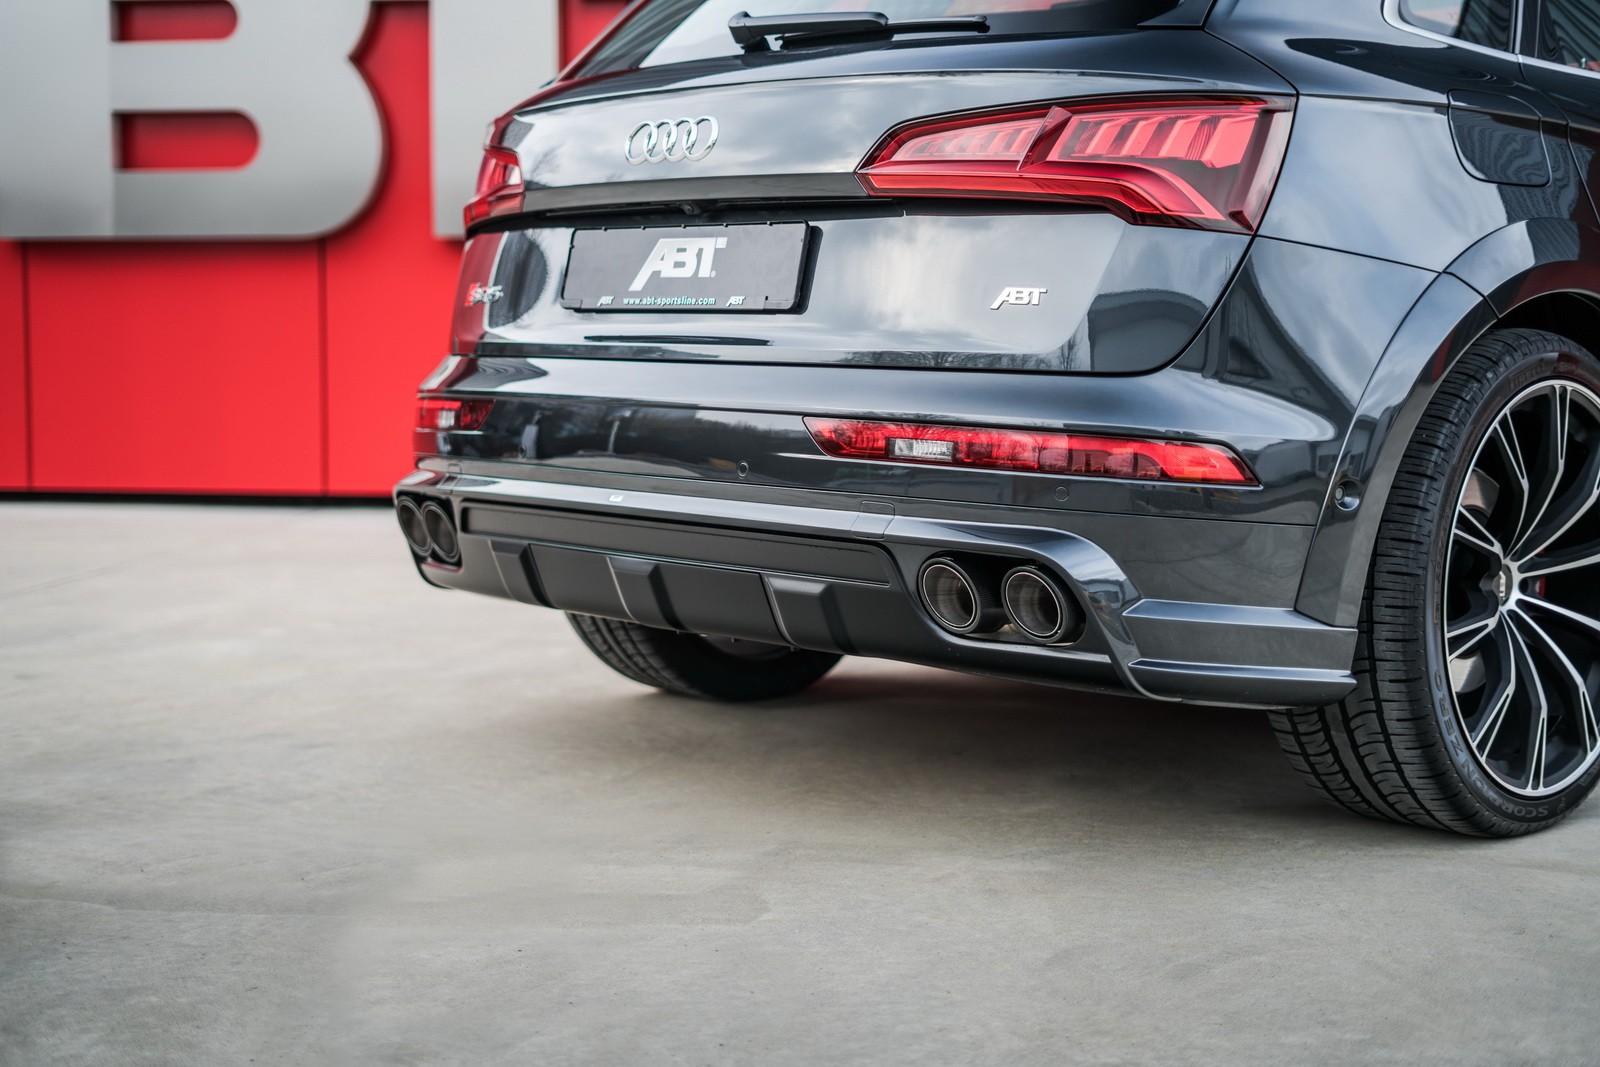 Audi SQ5 Tuning by ABT Includes Widebody Kit and 425 HP autoevolution